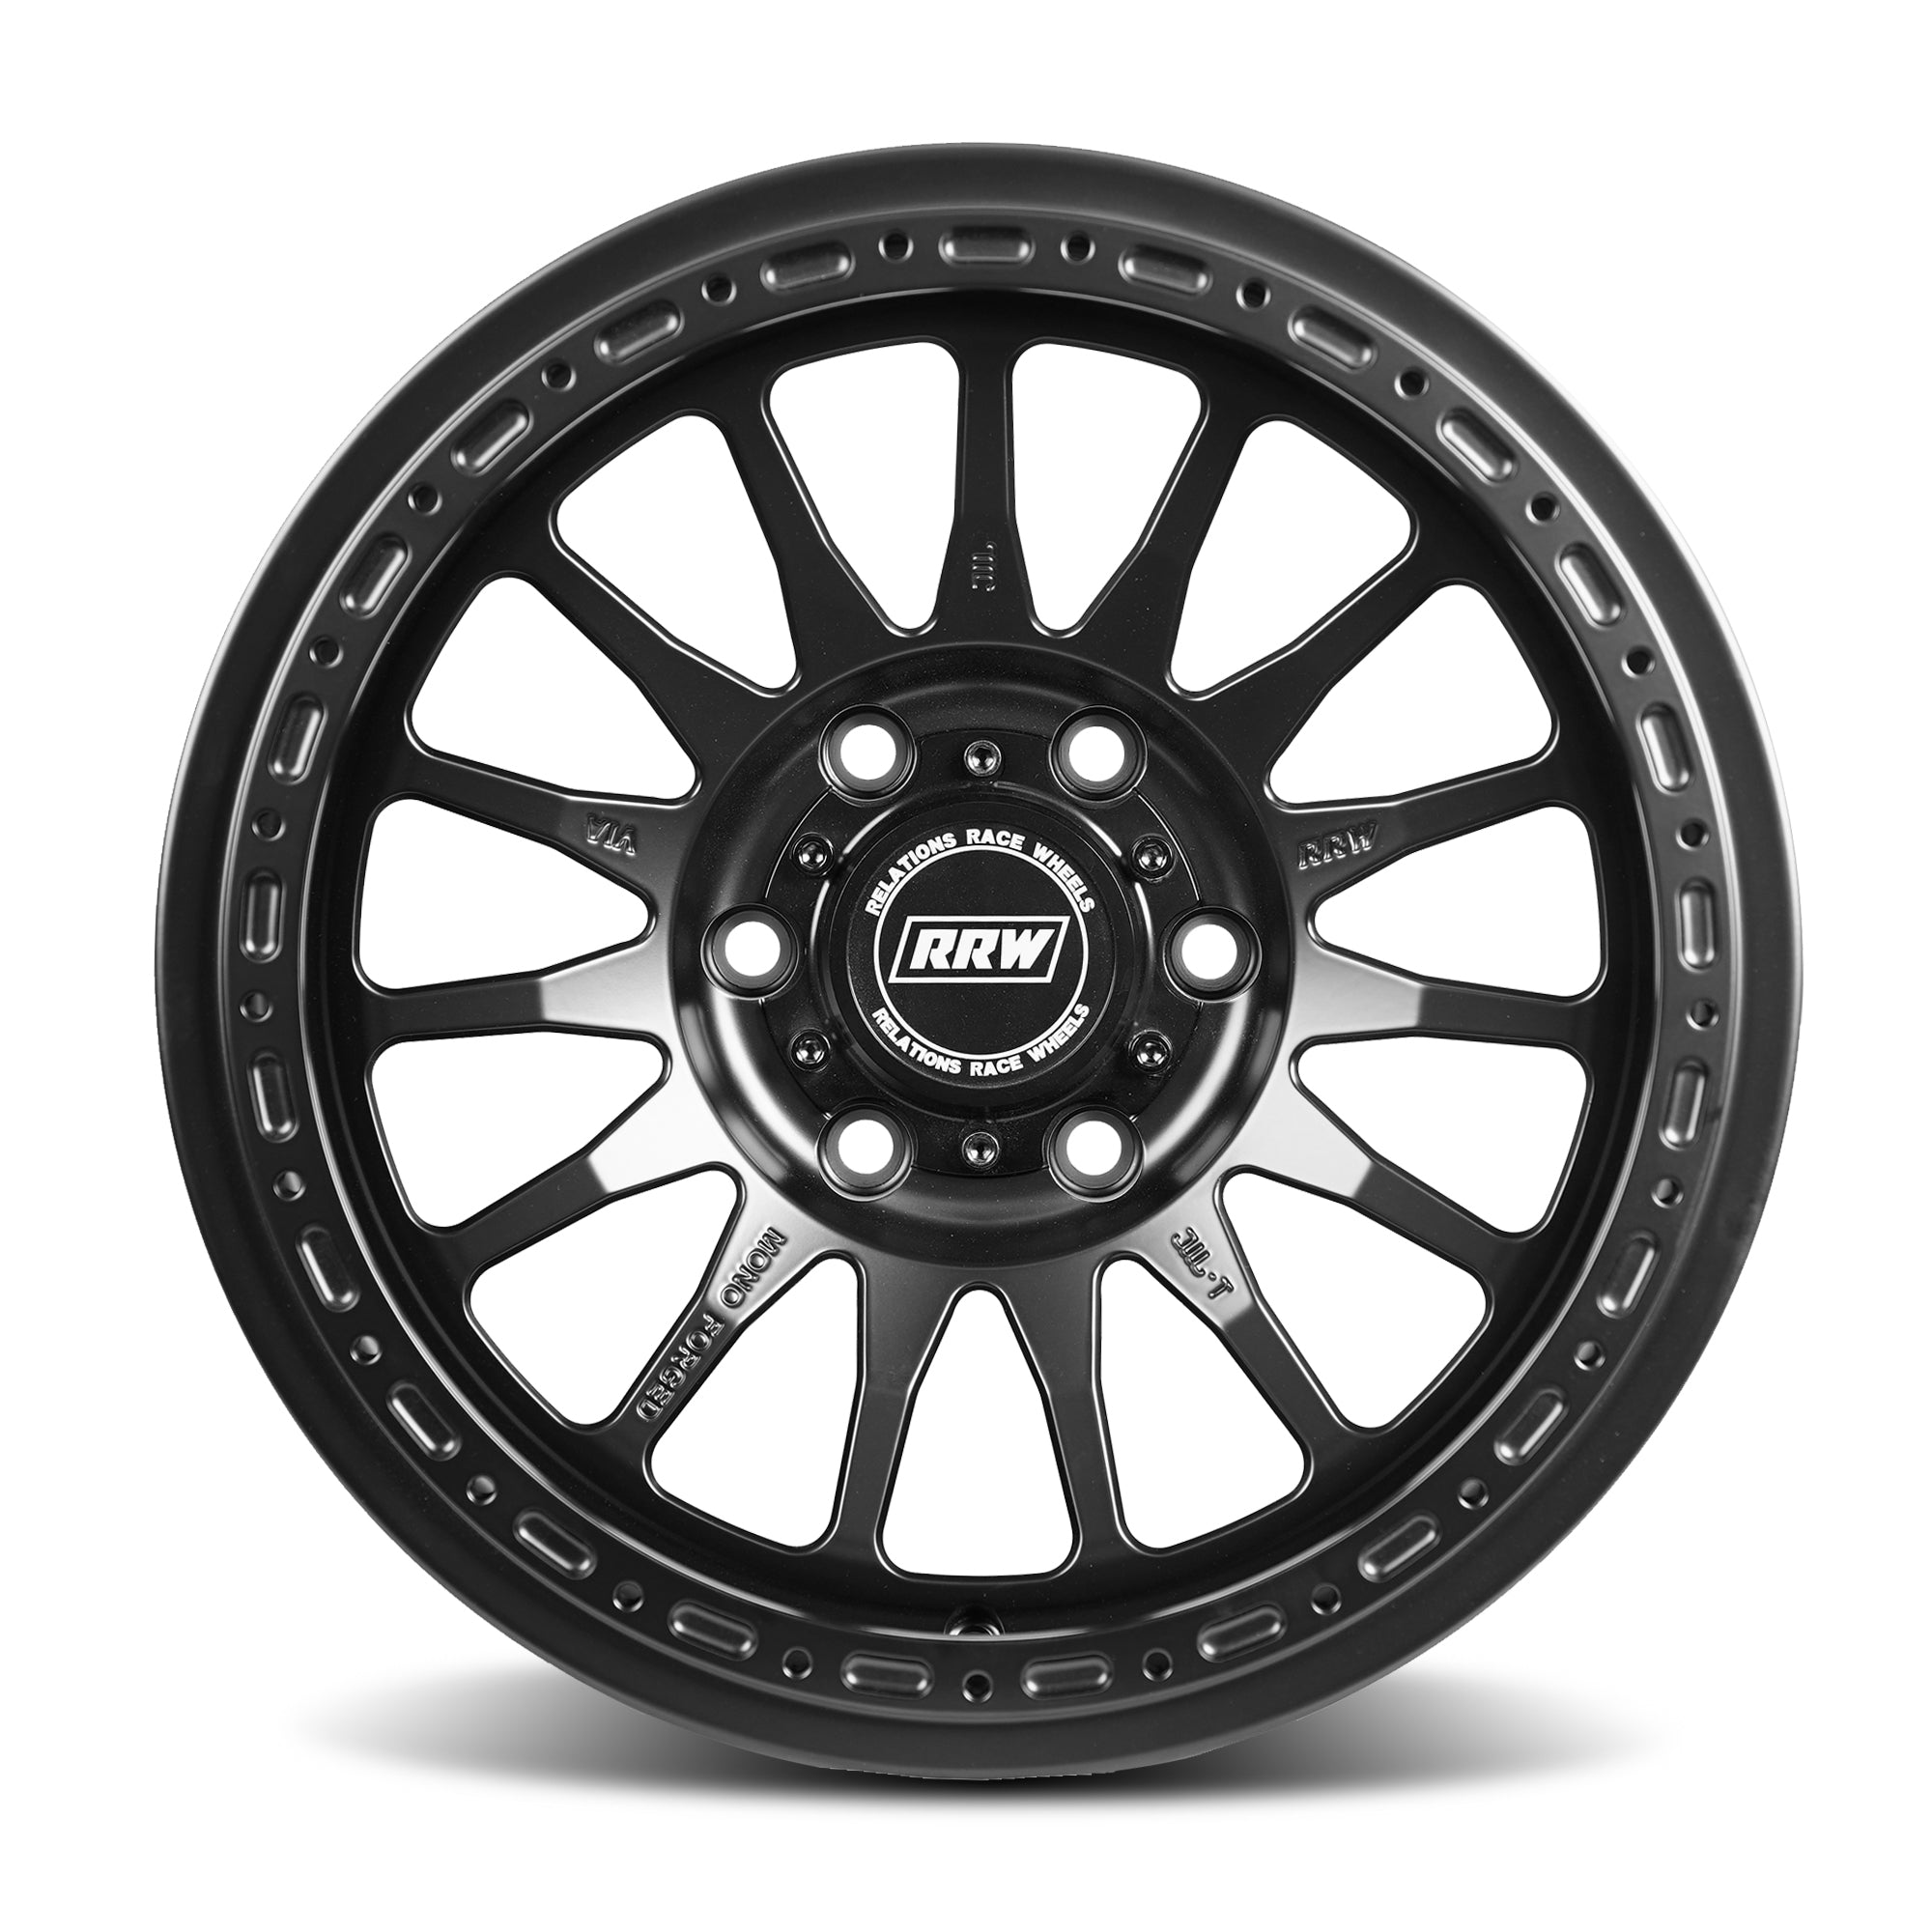 Coming Soon: 17x8 and 17x8.5 MonoForged Wheel